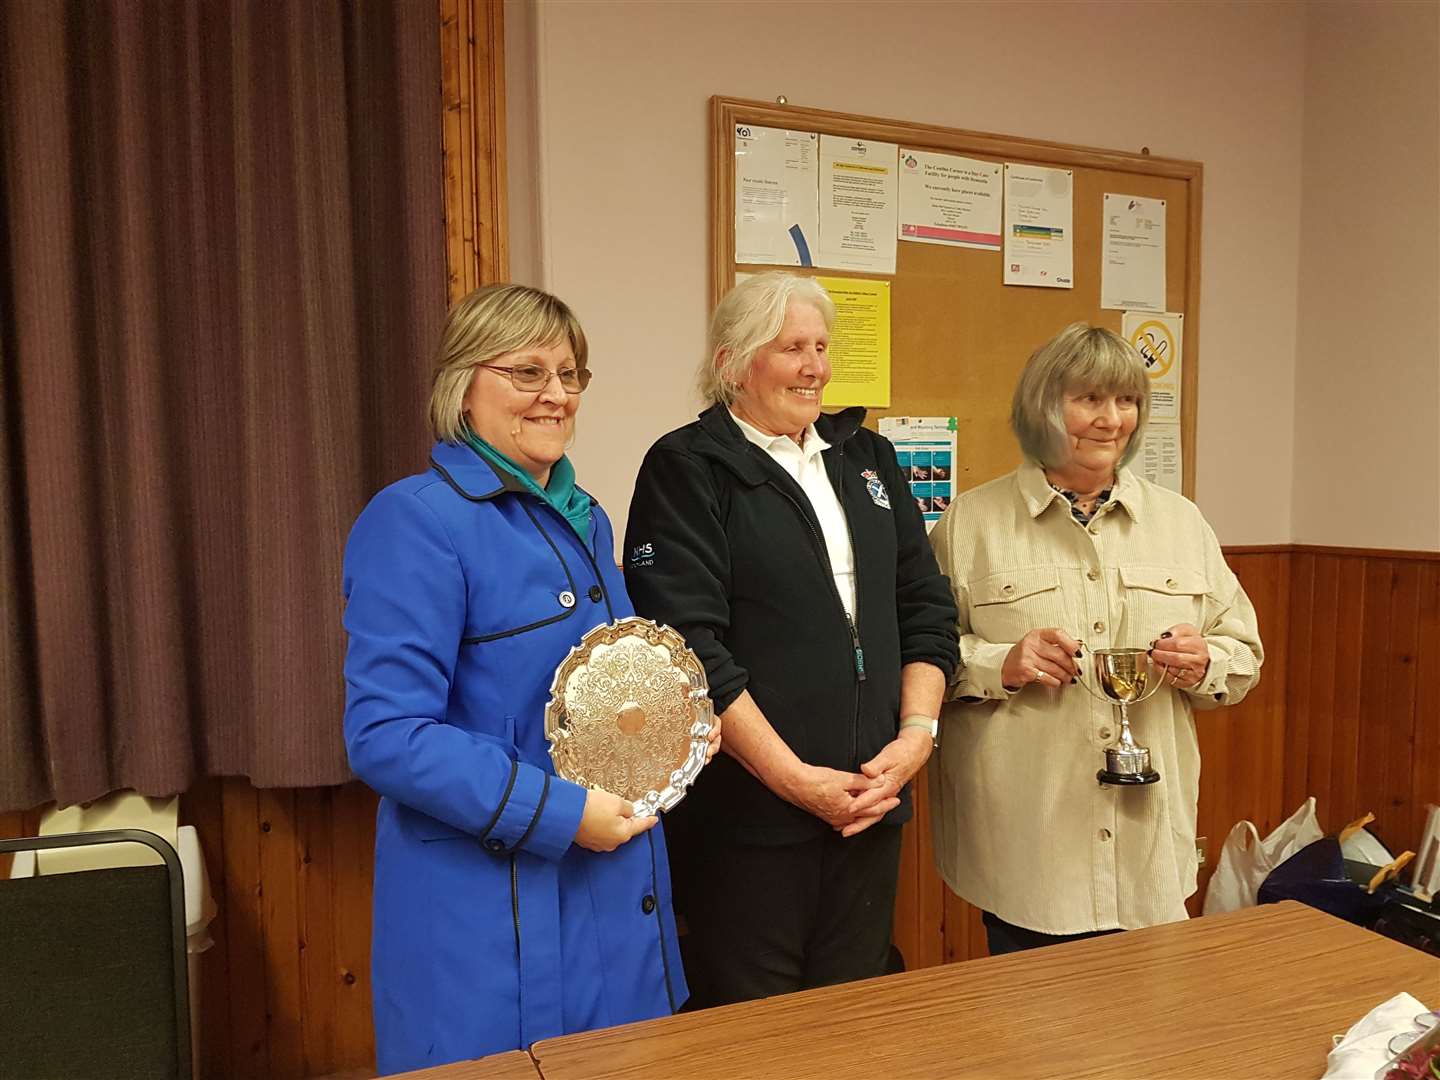 The Banniskirk cup for most points in Handicrafts was won by Fran Manners & the Banniskirk Silver plate for most points in baking was won by Jan Falconer.